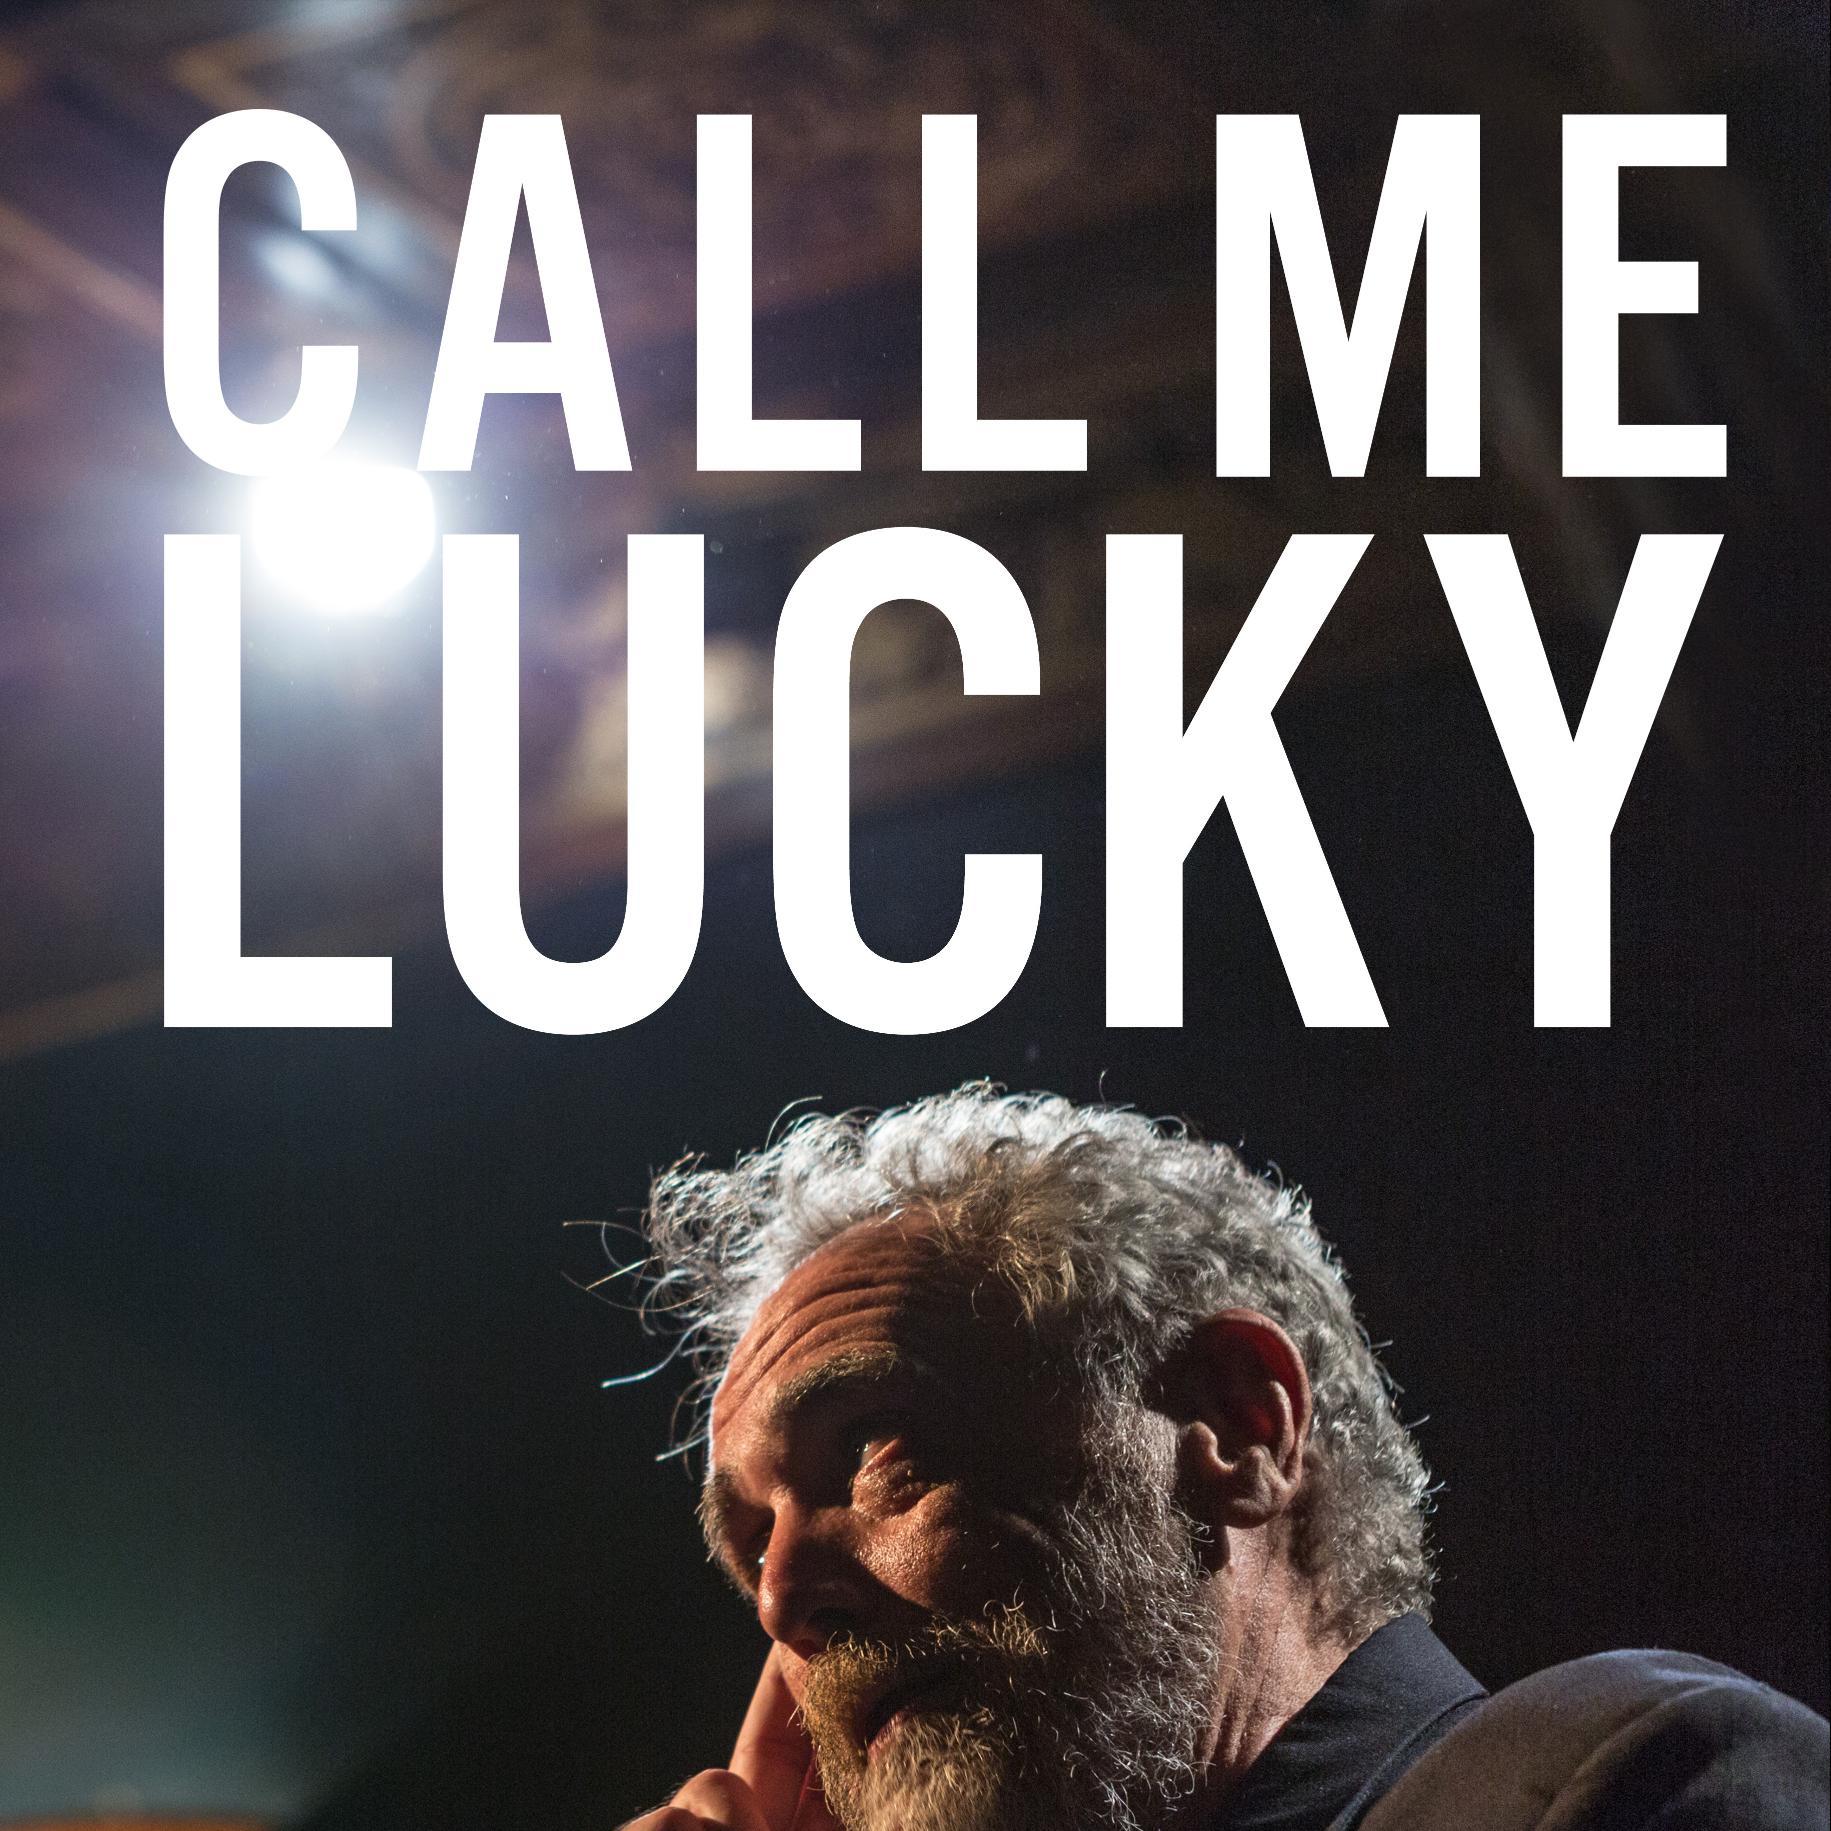 Barry Crimmins is the star of the documentary "Call Me Lucky."